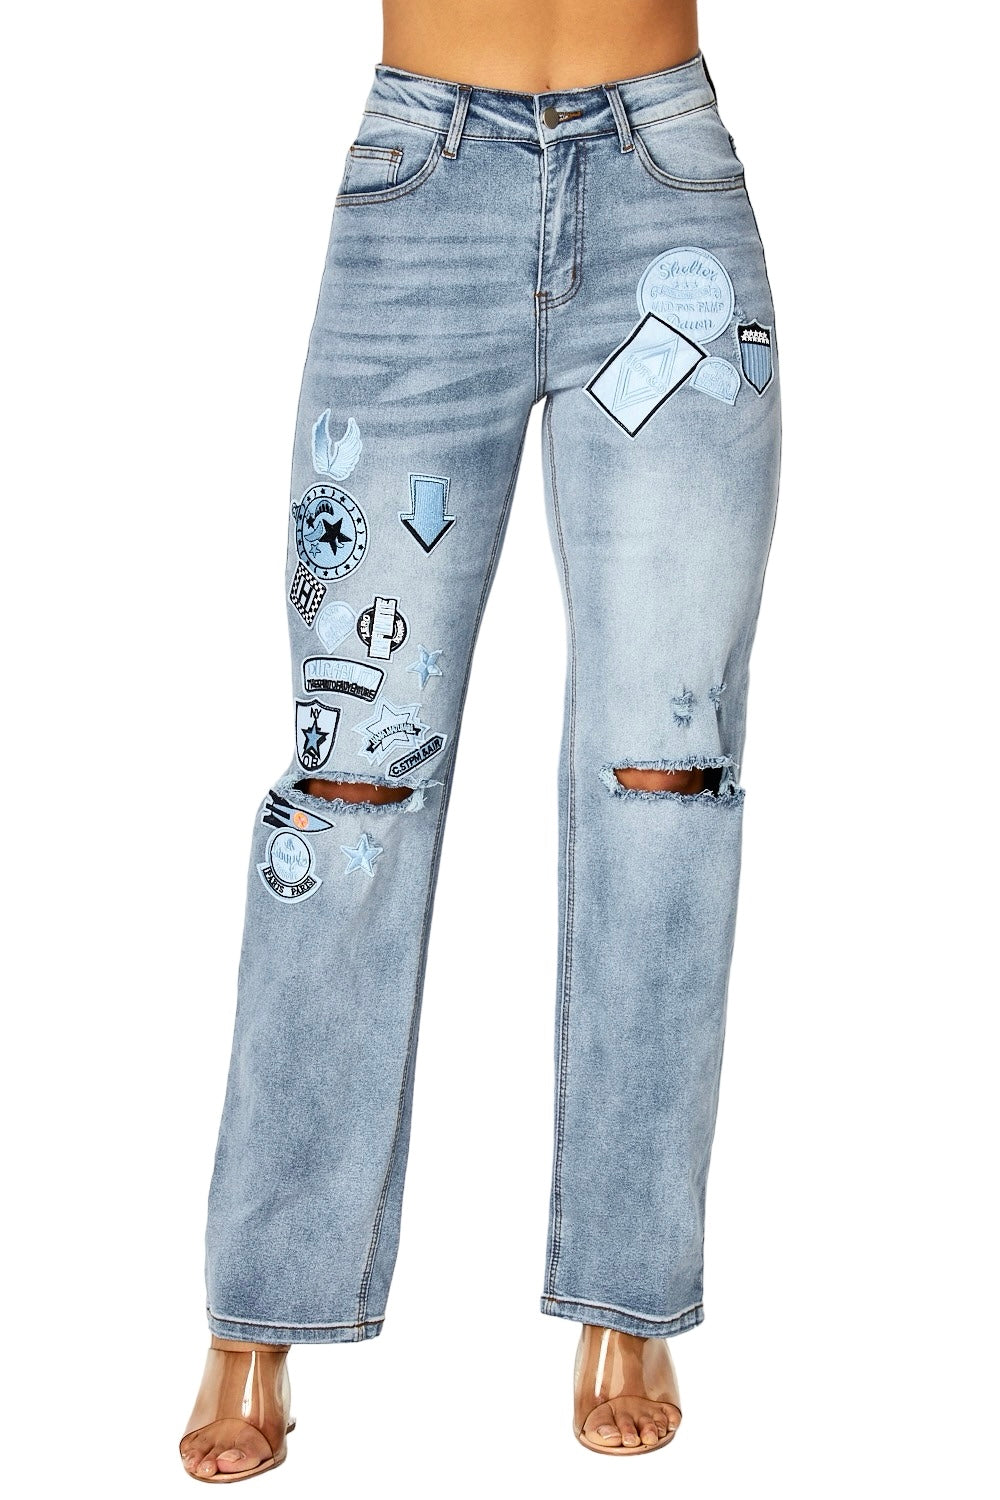 Denim Patch Exposed Knee Jeans